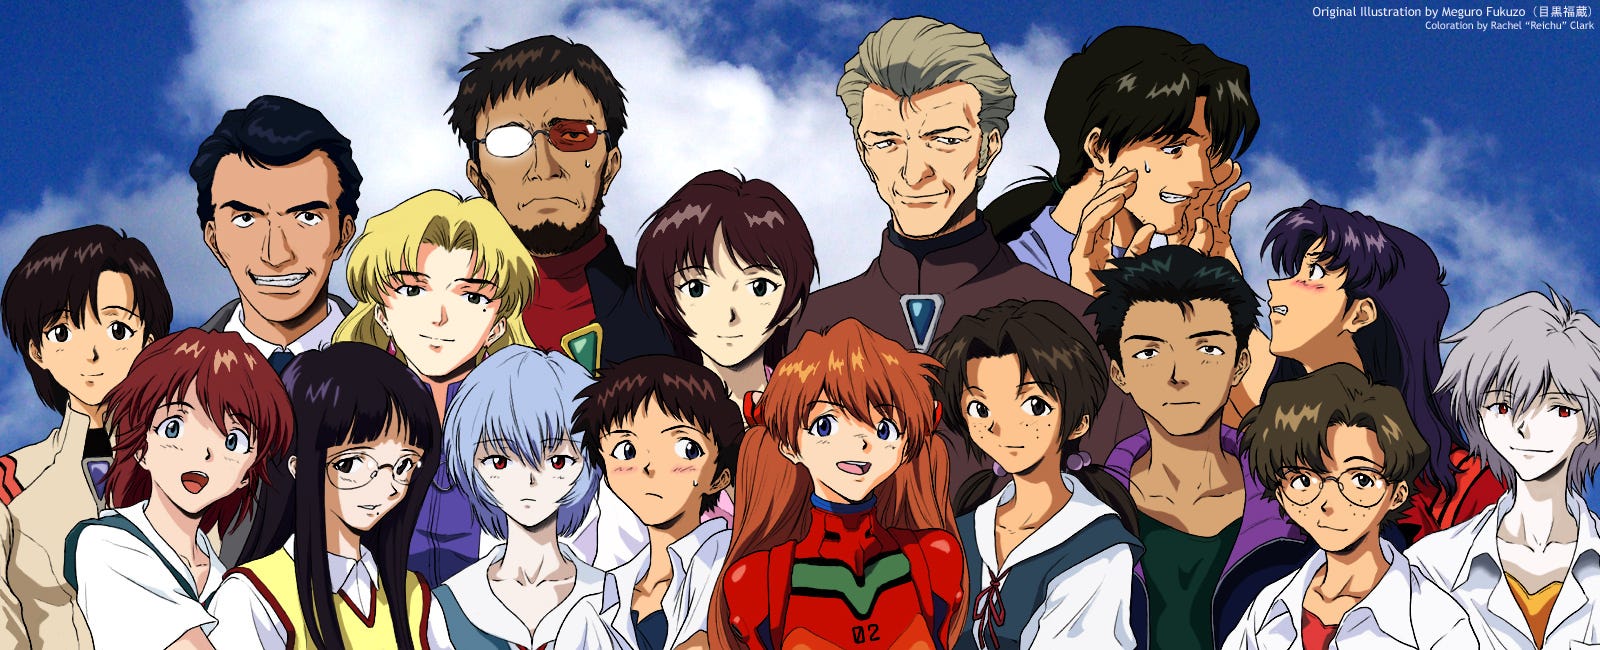 Evangelion' Is A Great Anime But Not Without Its Influences And Hardly The  First Of Its Kind